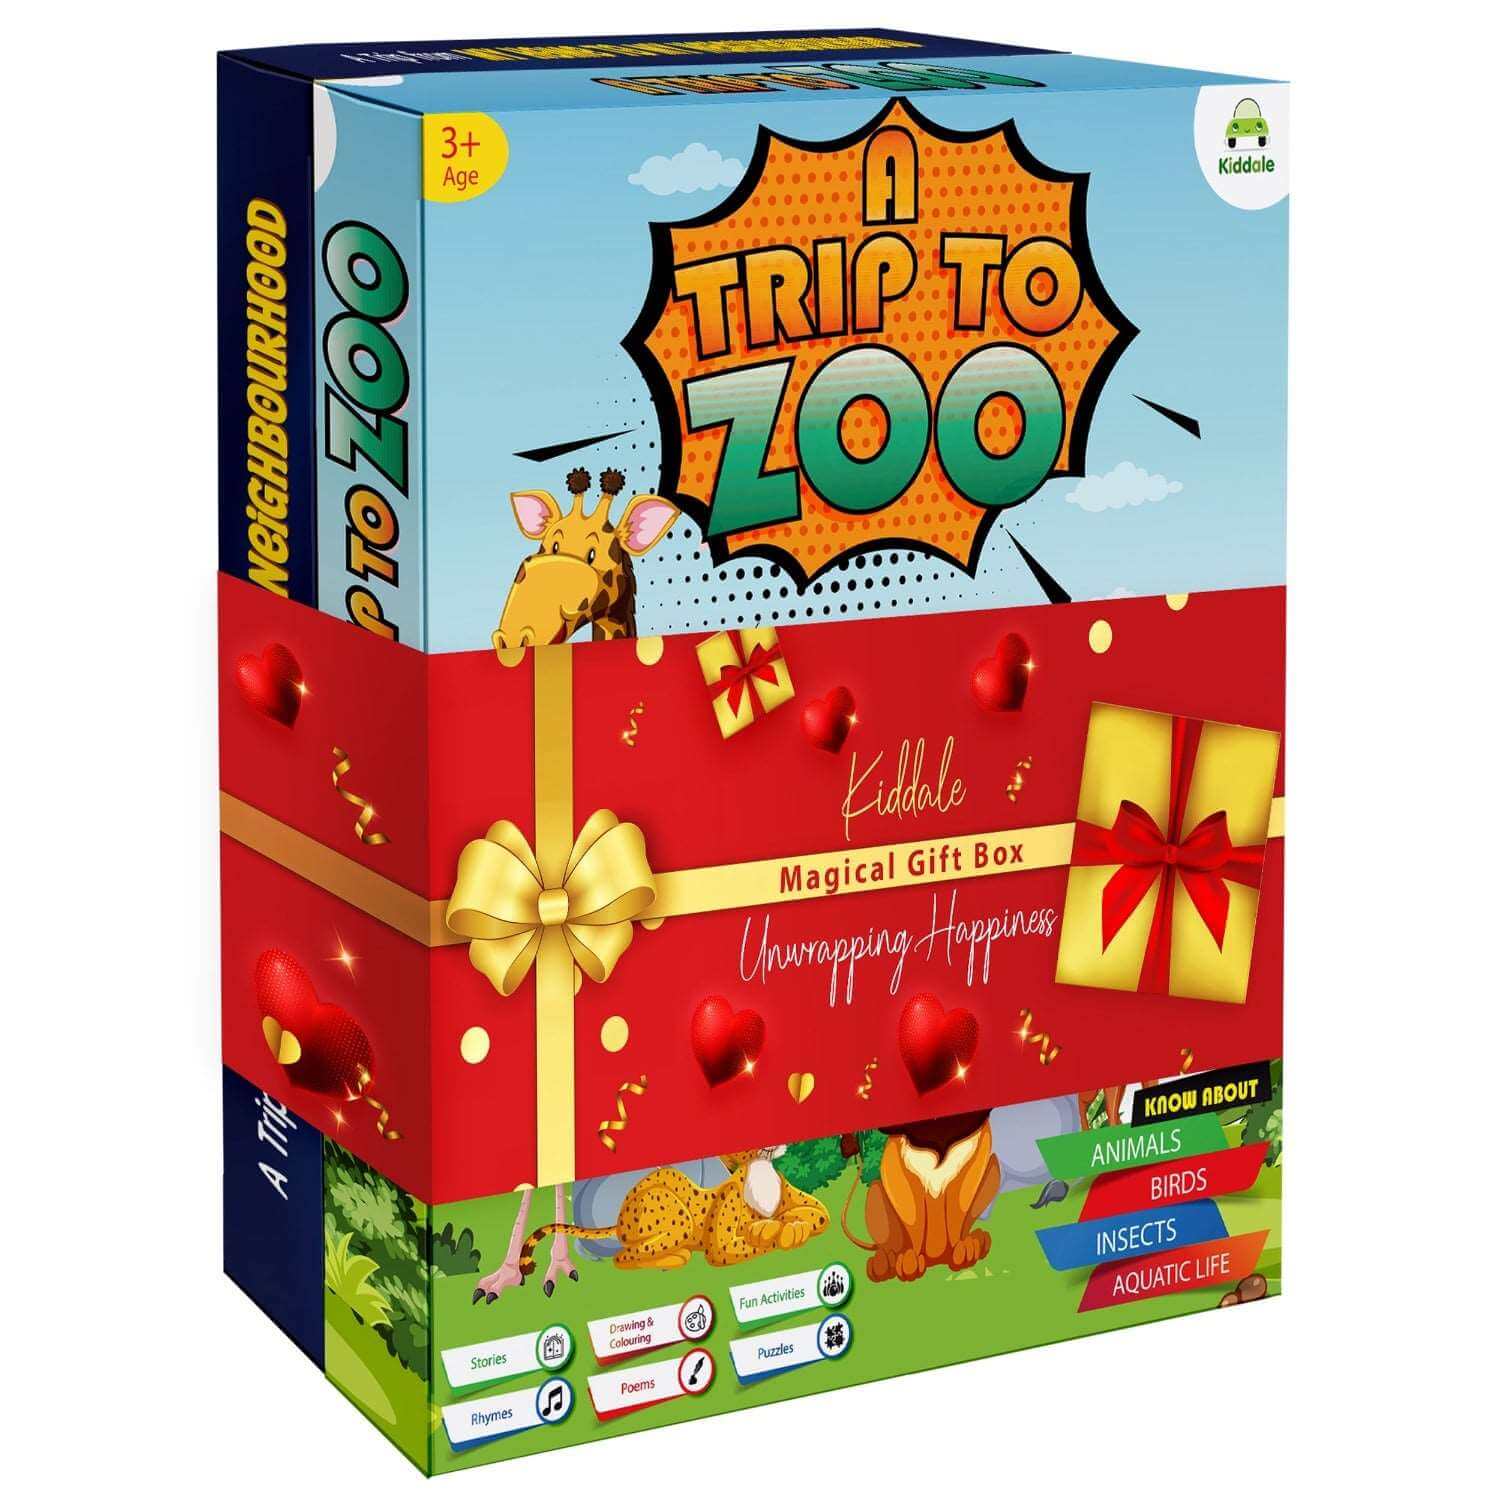 Kiddale 2-Pack My Home to Neighbourhood & Trip to Zoo Interactive Musical Sound Books